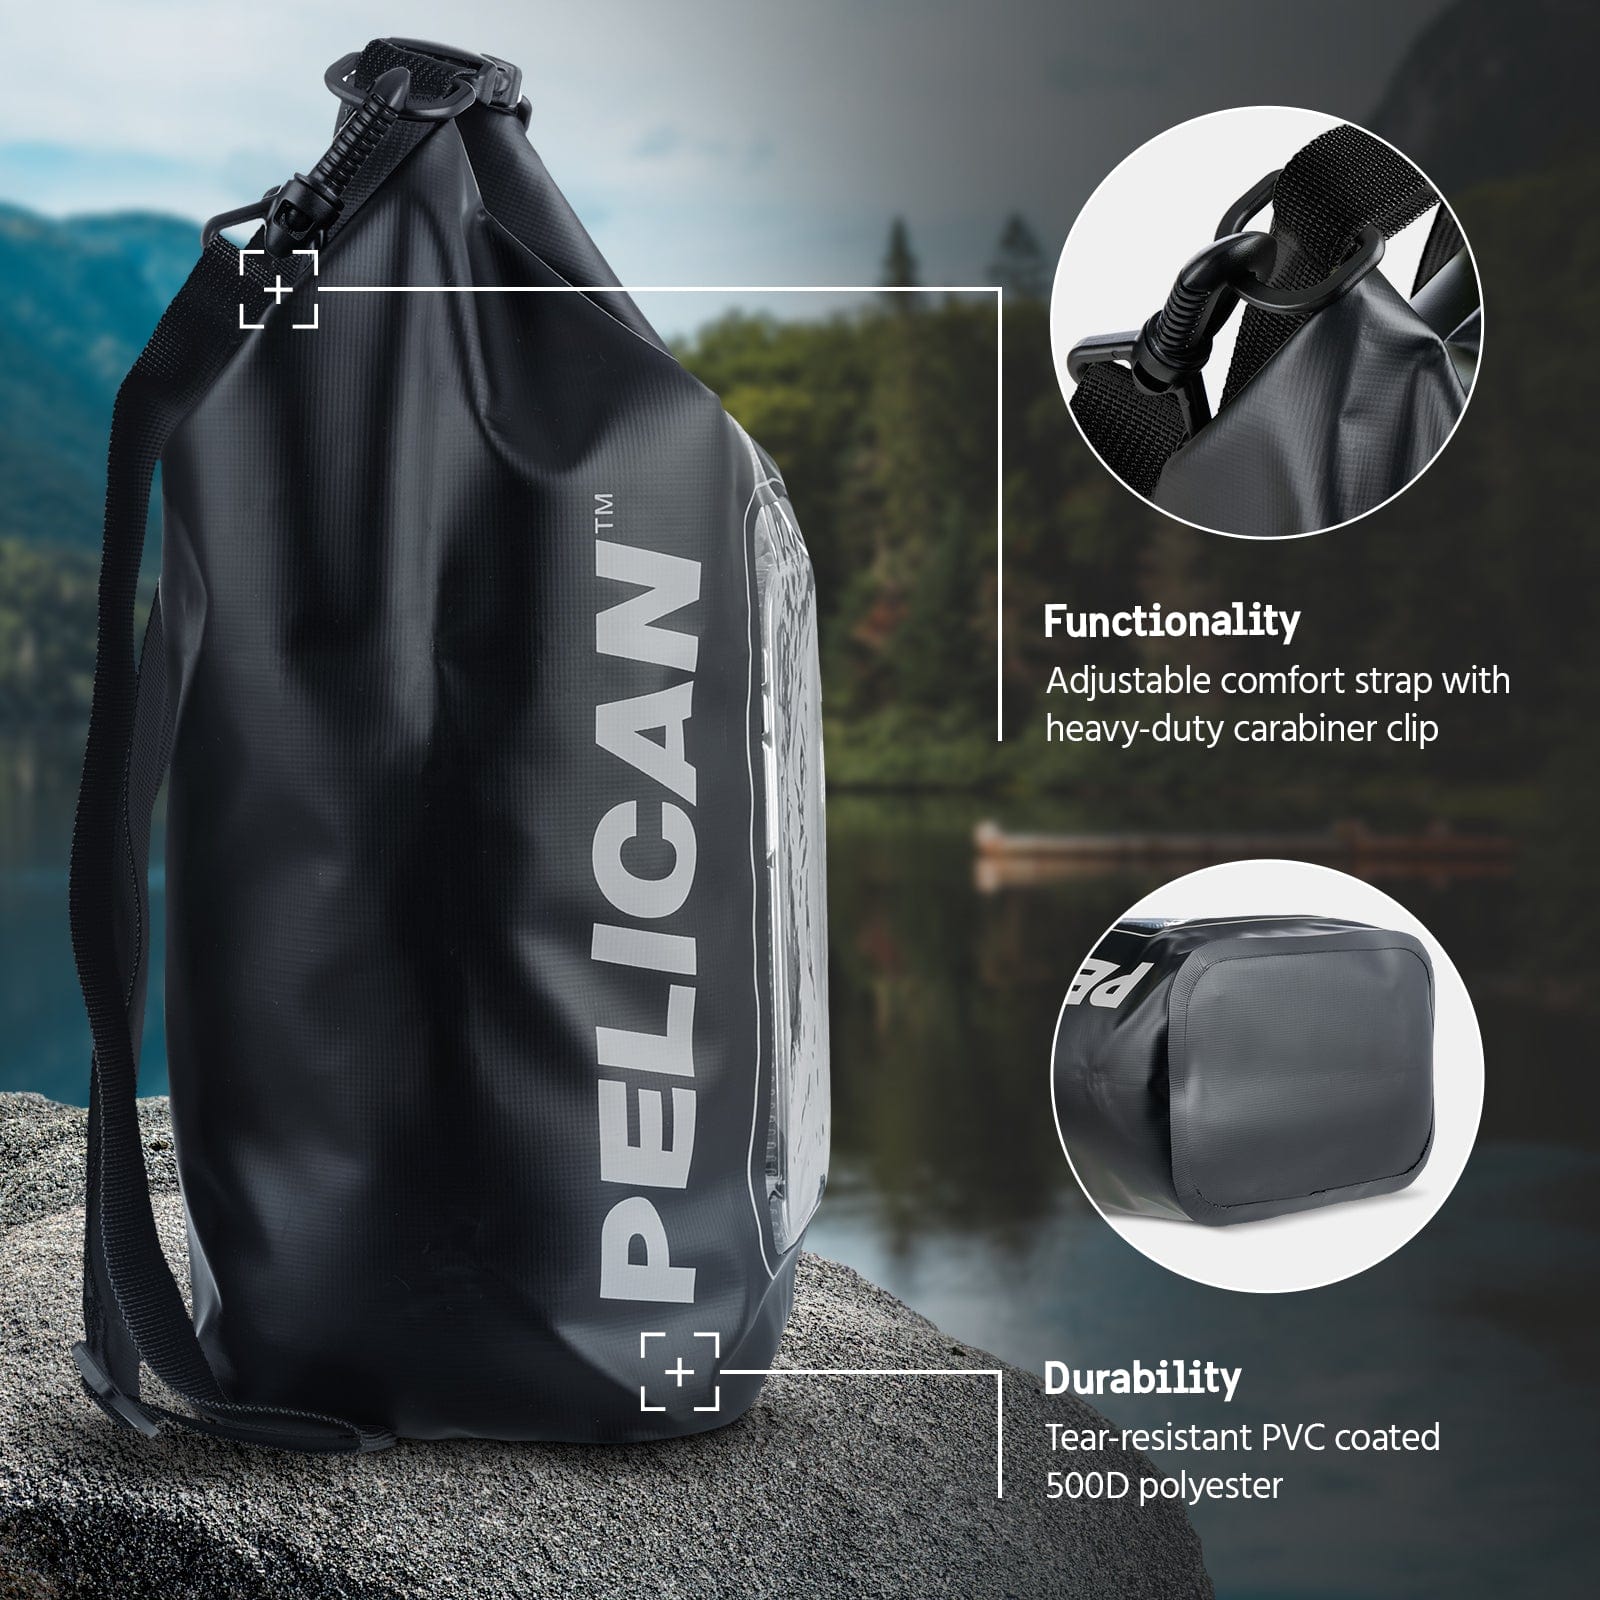 Functionality. Adjustable comfort strap with heavy duty carabiner clip. Durability - Tear resistant PVC coated polyester